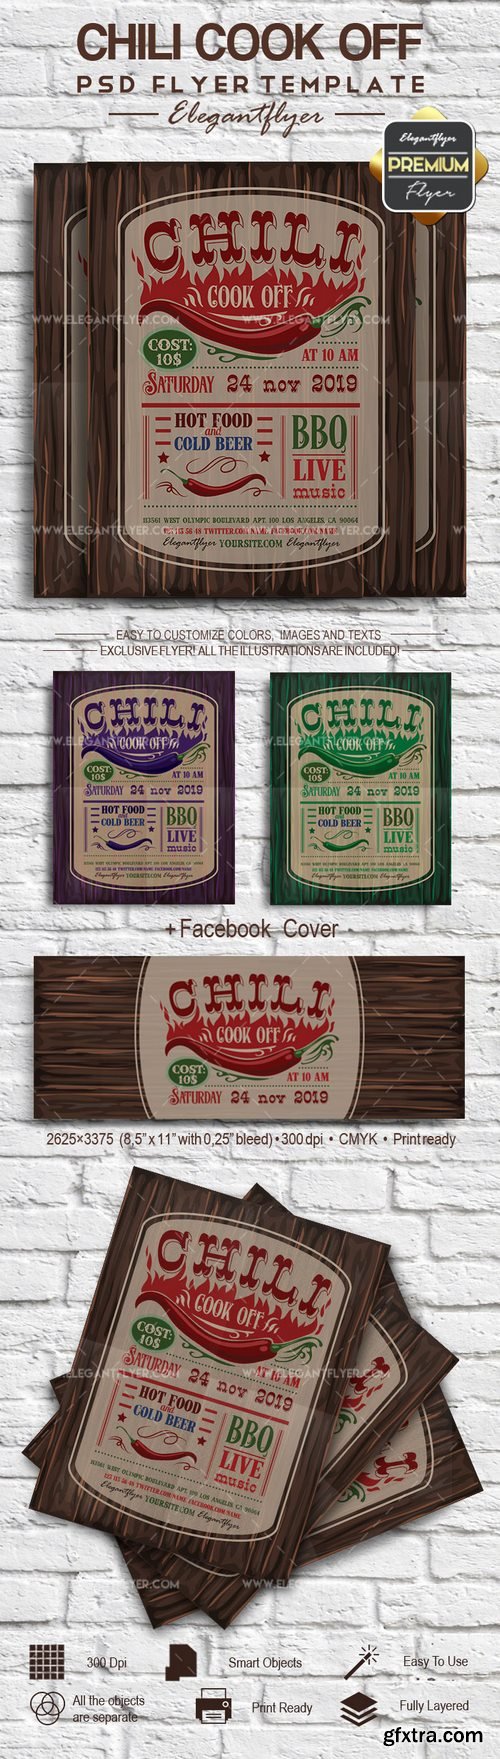 Chili Cook Off- Flyer PSD Template + Facebook Cover